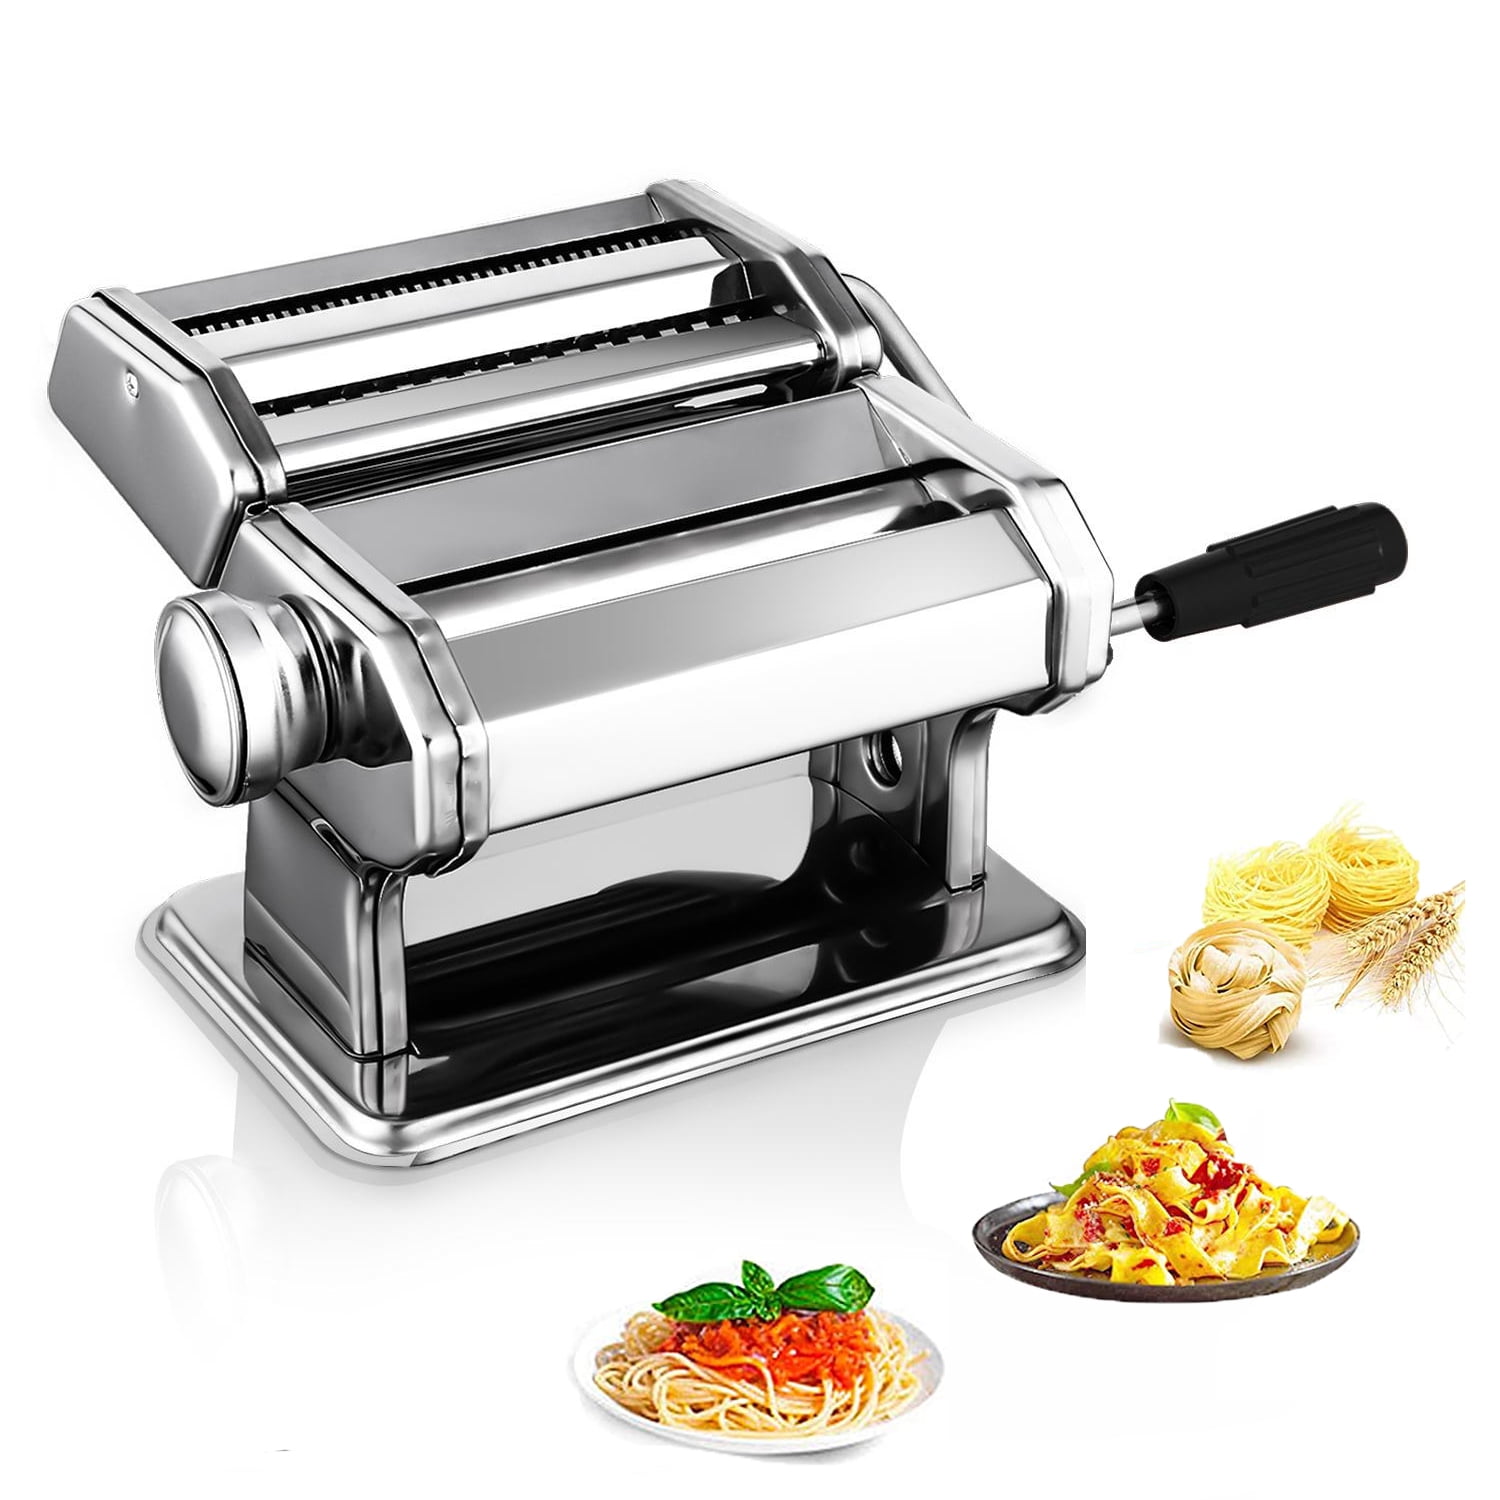 Details about   Stainless Steel Pasta Noodle Maker Roller Machine Adjust for Spaghetti Lasagna